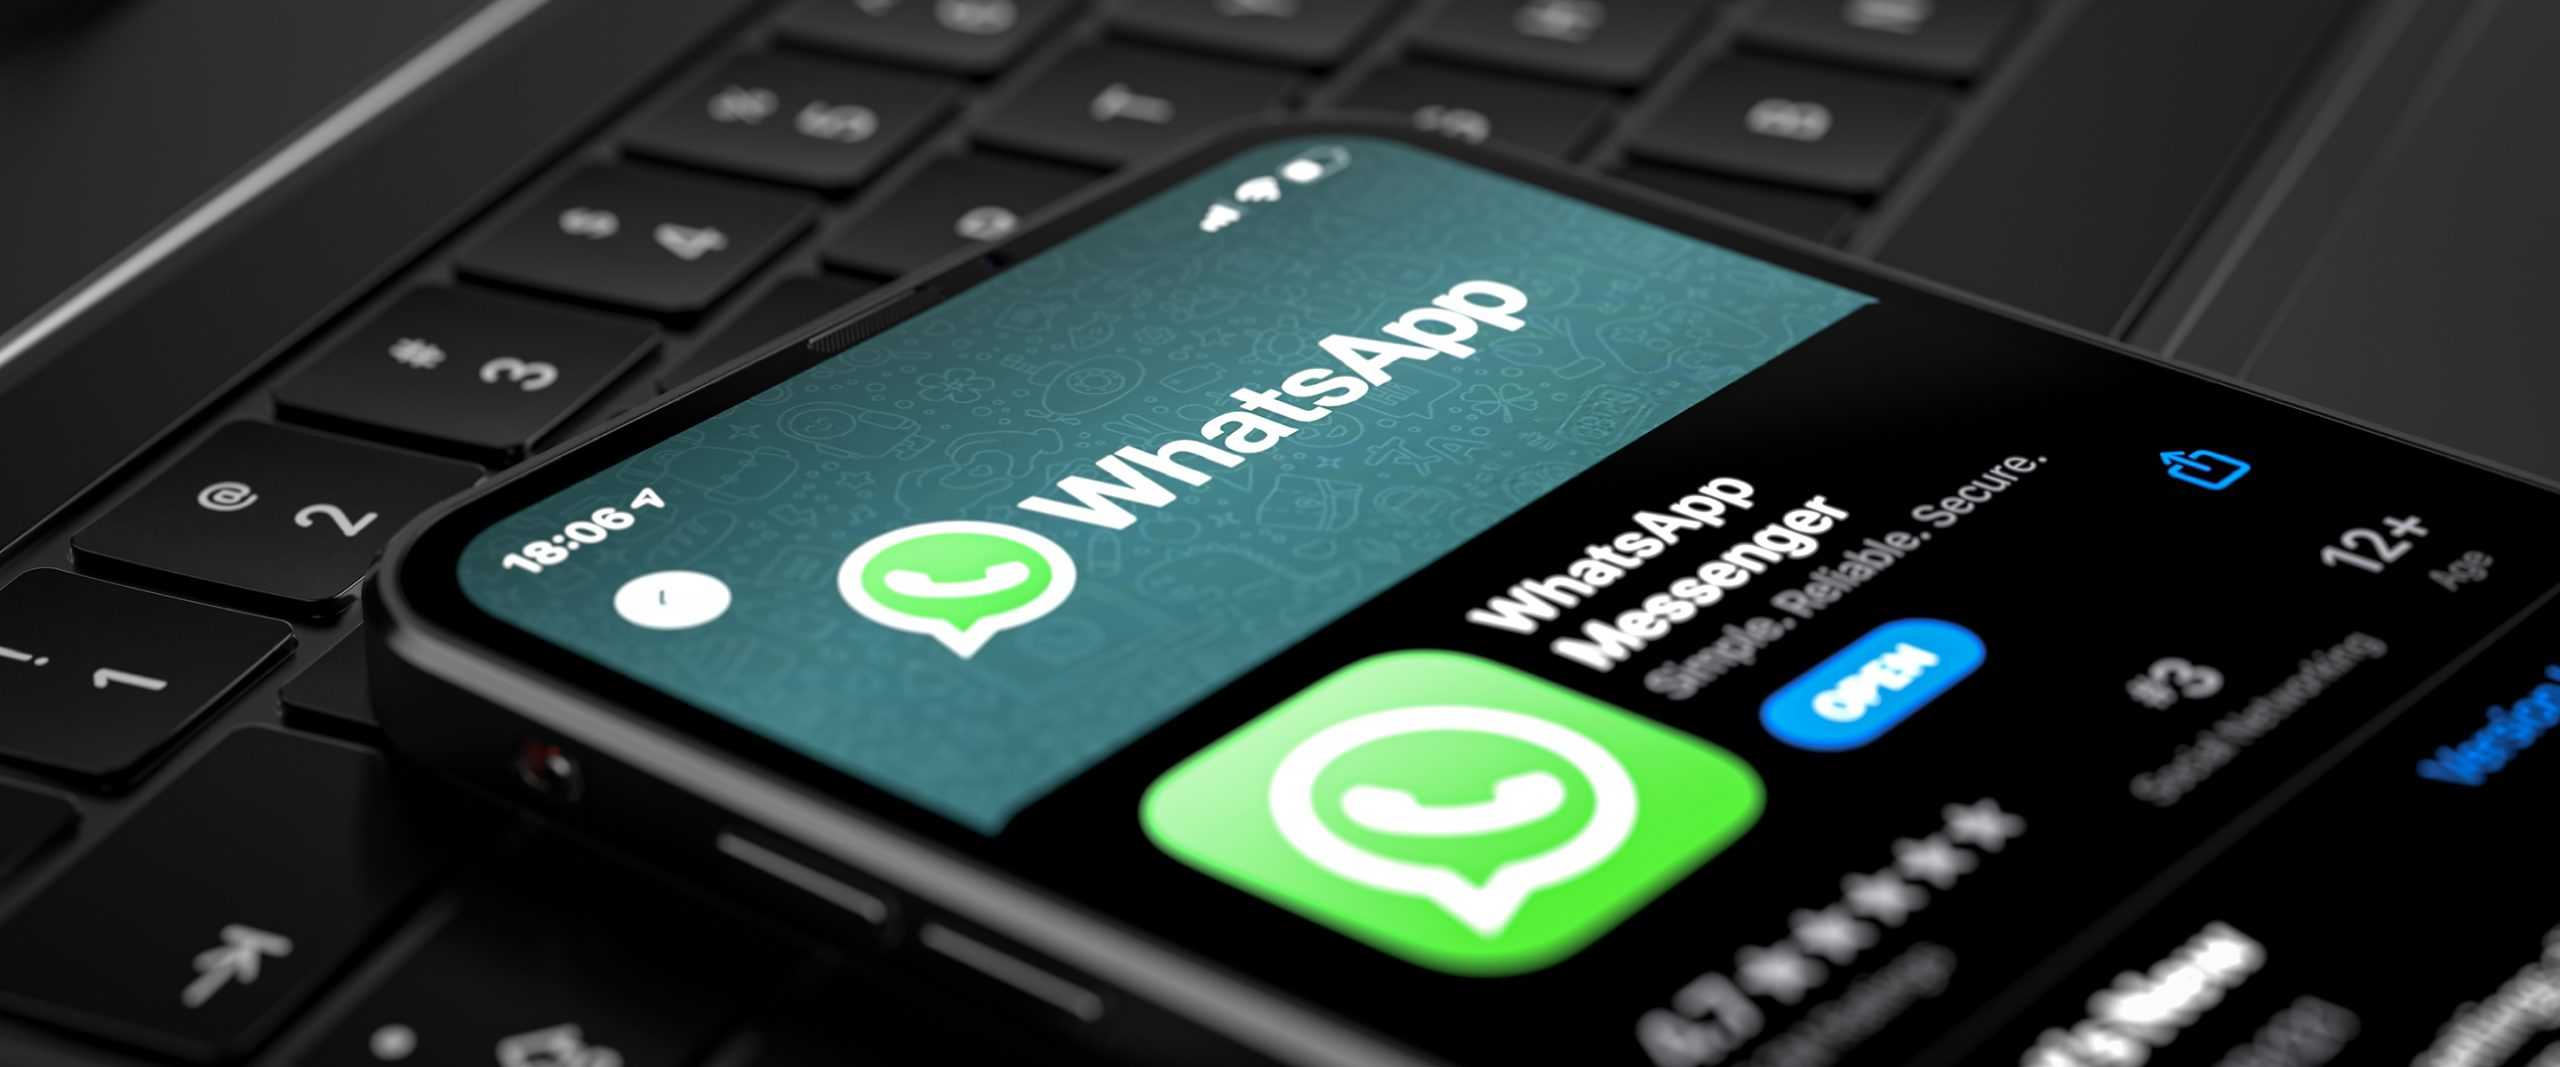 WhatsApp is receiving significant backlash due to its privacy policy update